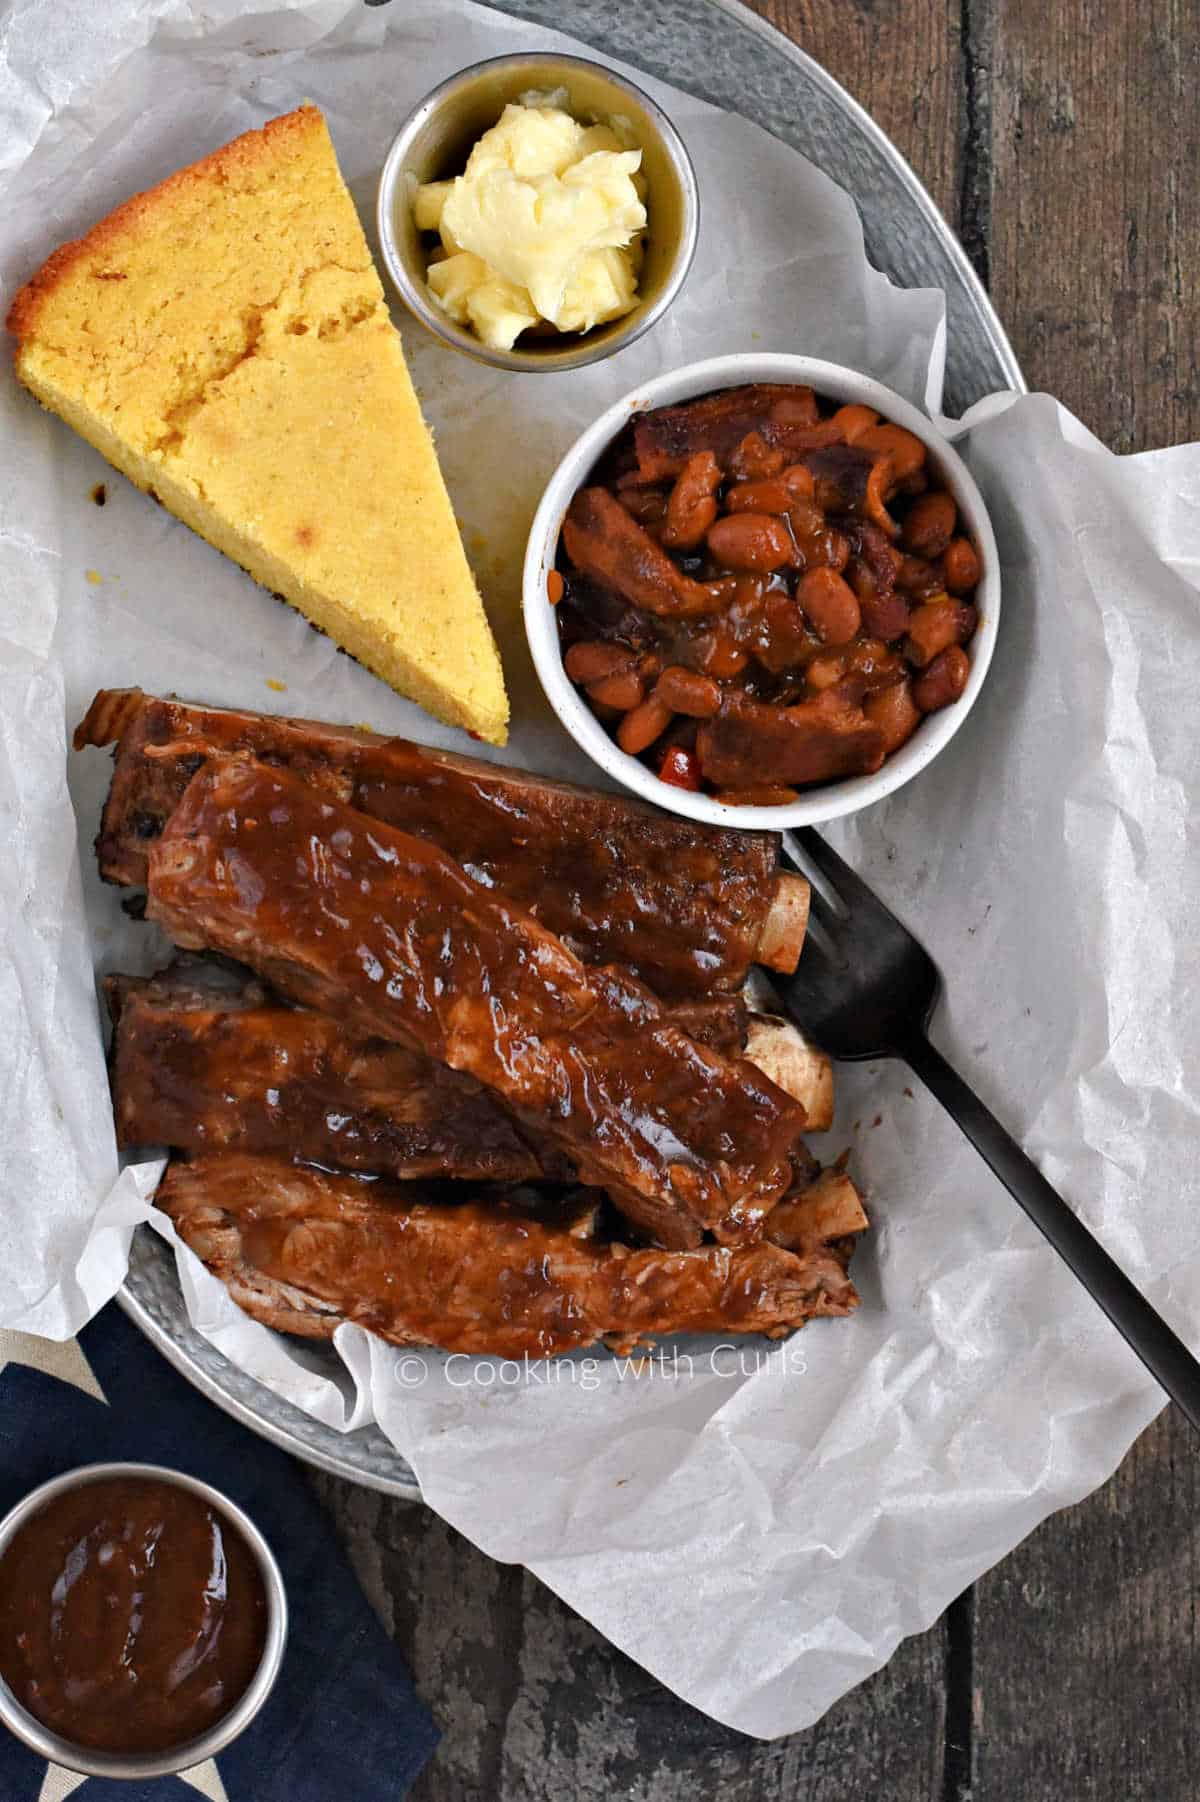 Looking down on a tray with barbecue ribs, cornbread wedge, and a small bowl of baked beans with bacon.